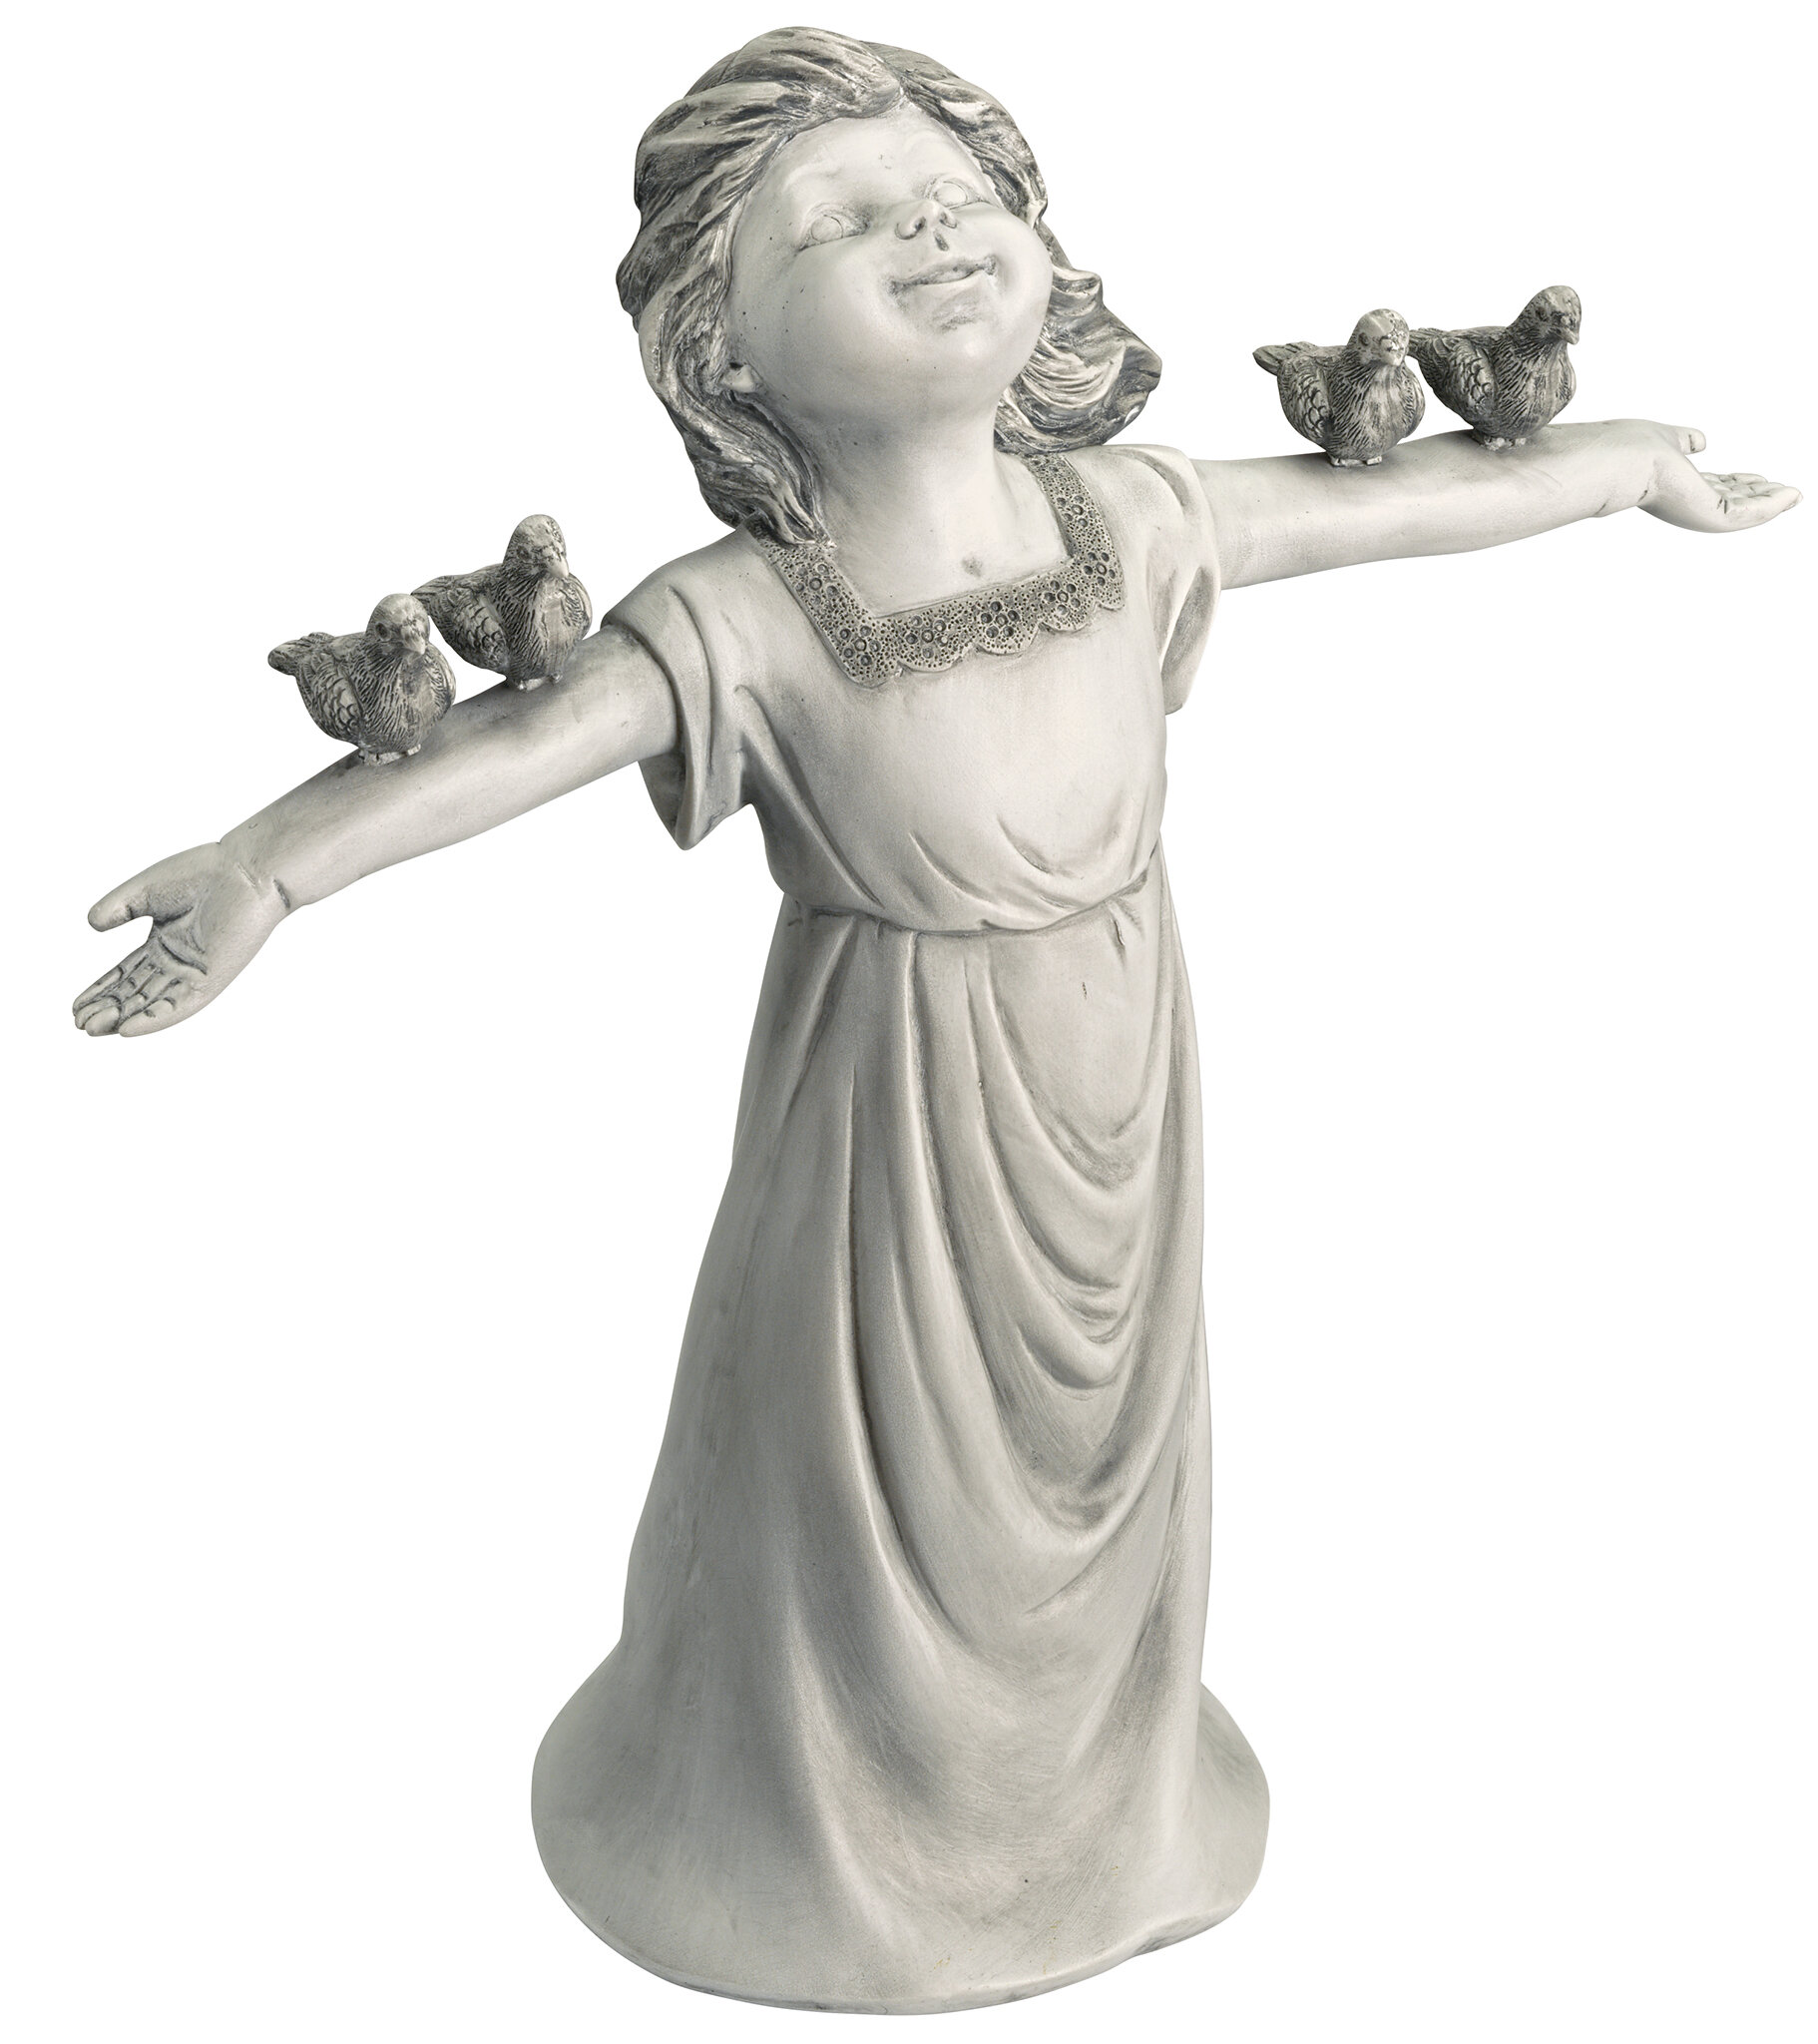 Medium Design Toscano NG34012 Basking in Gods Glory Little Girl Outdoor Garden Statue 18 Inch Two Tone Stone 